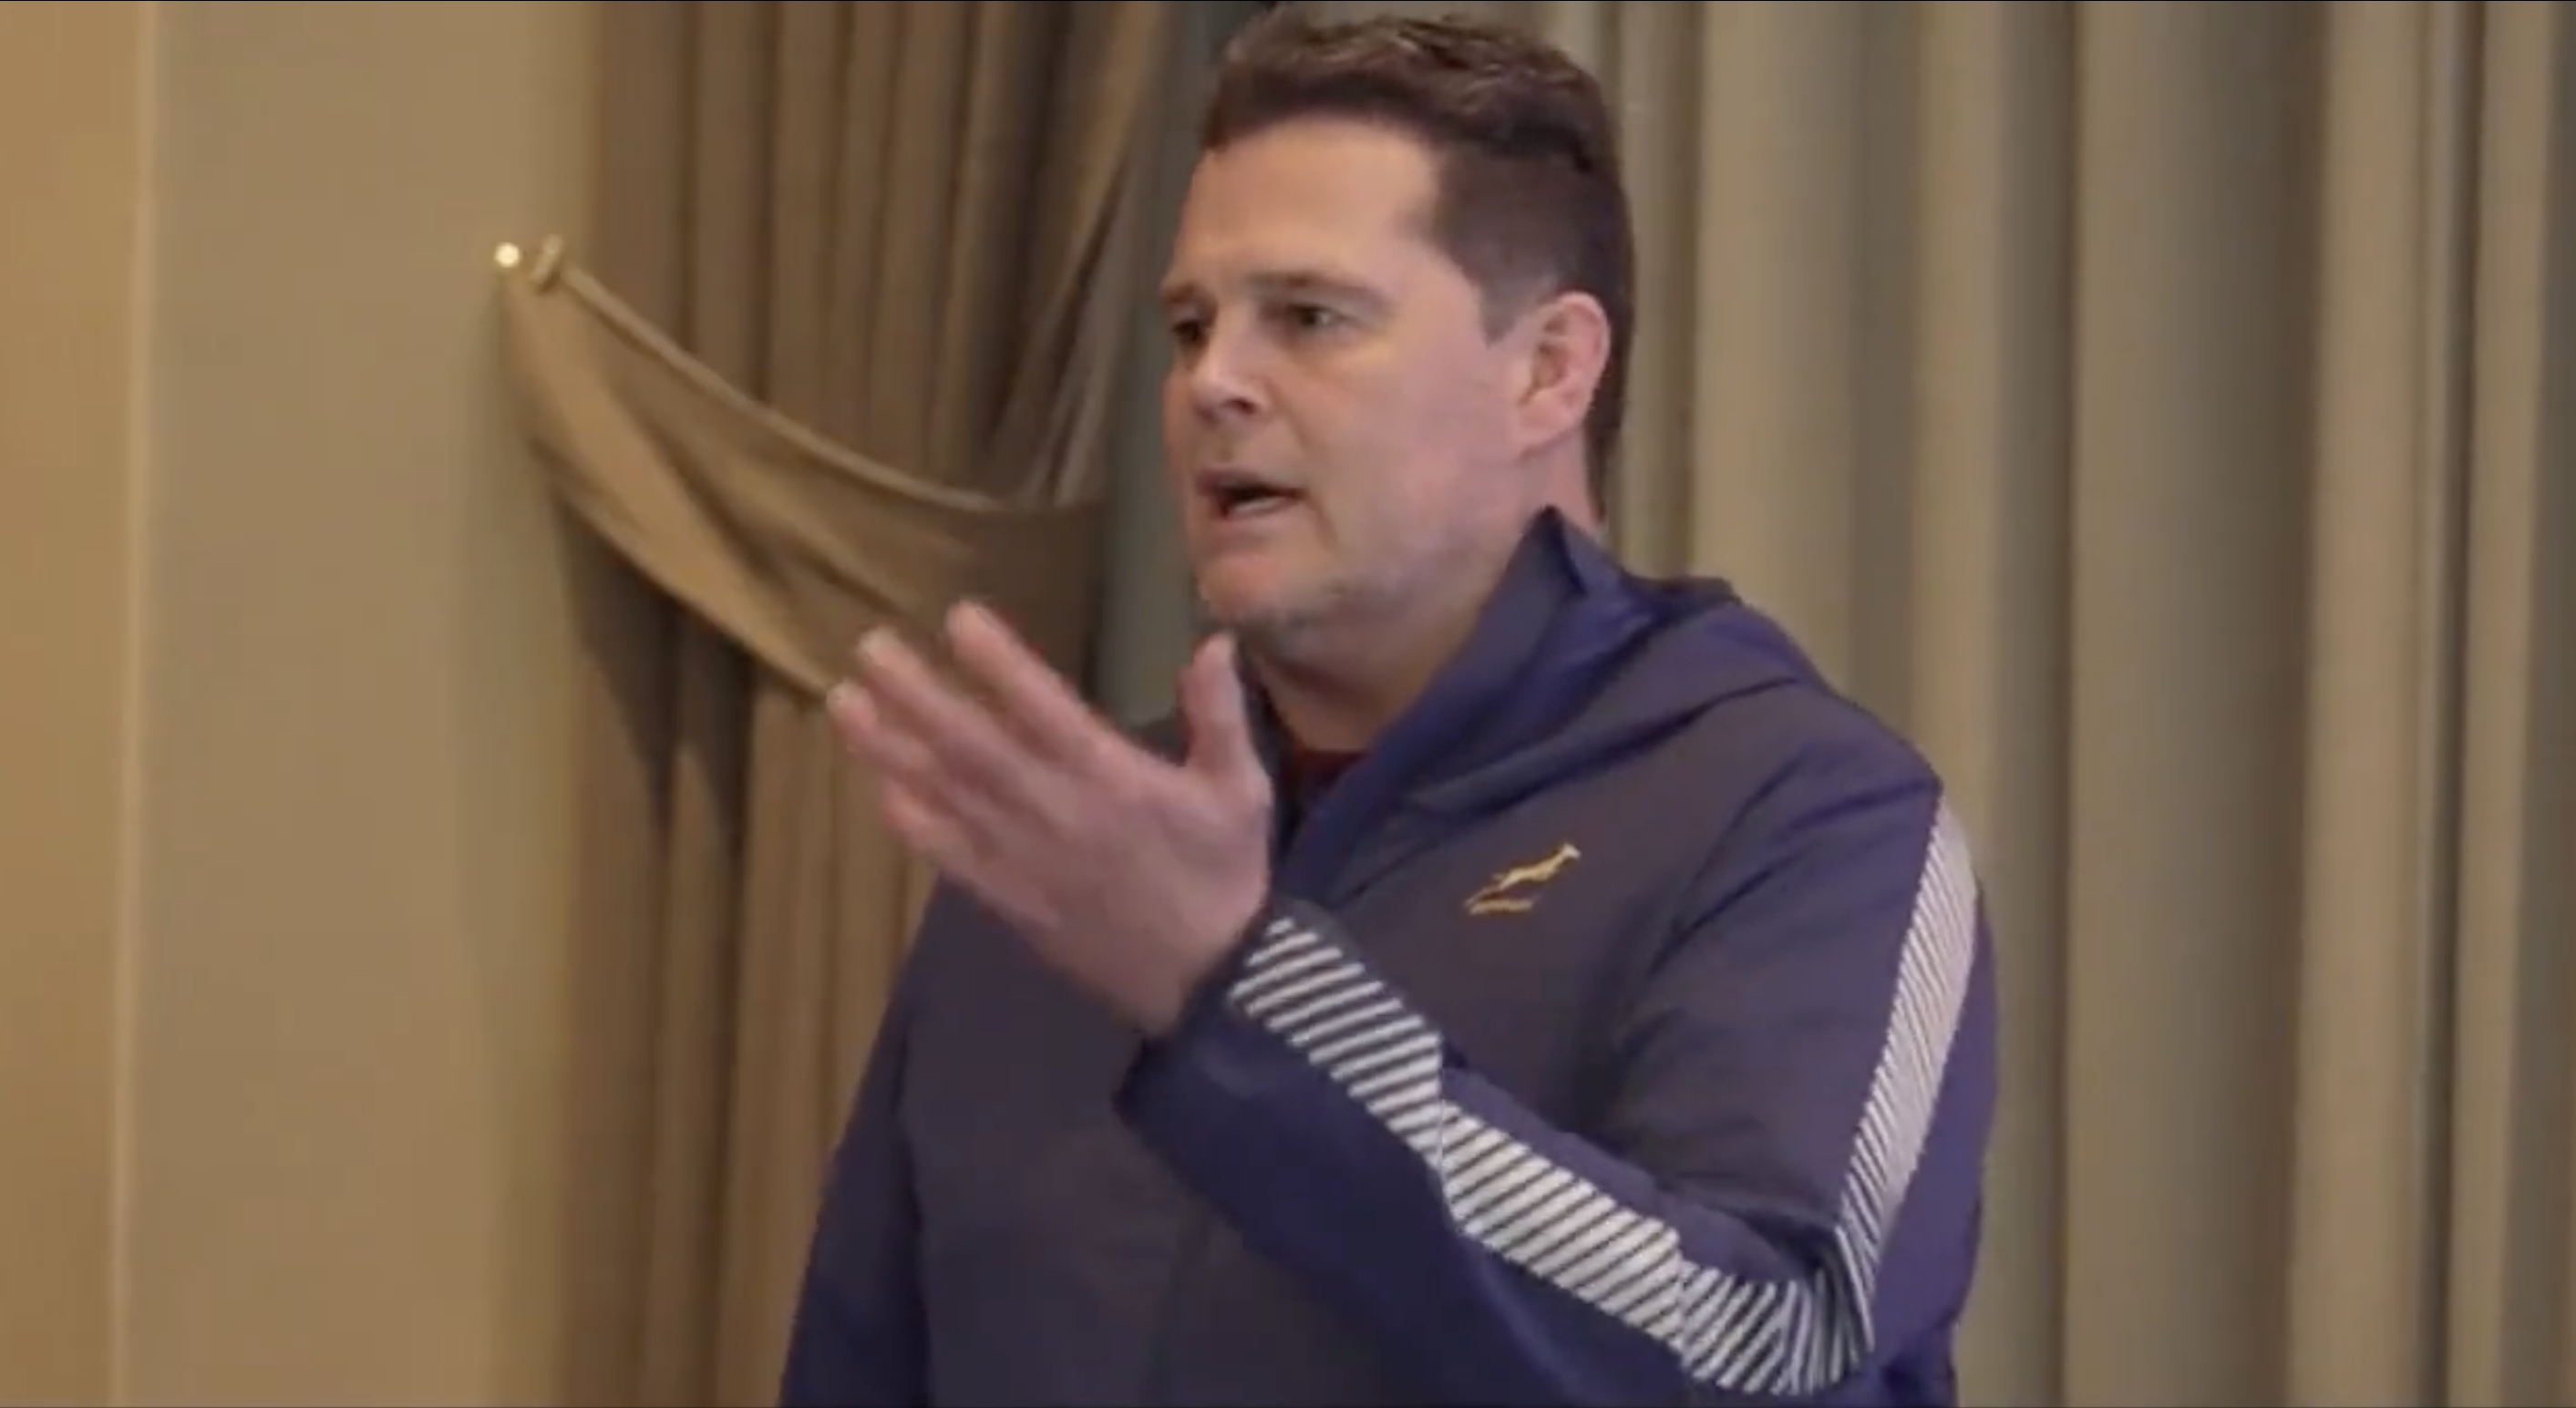 Rassie Erasmus leaks another video after Boks' series with Wales